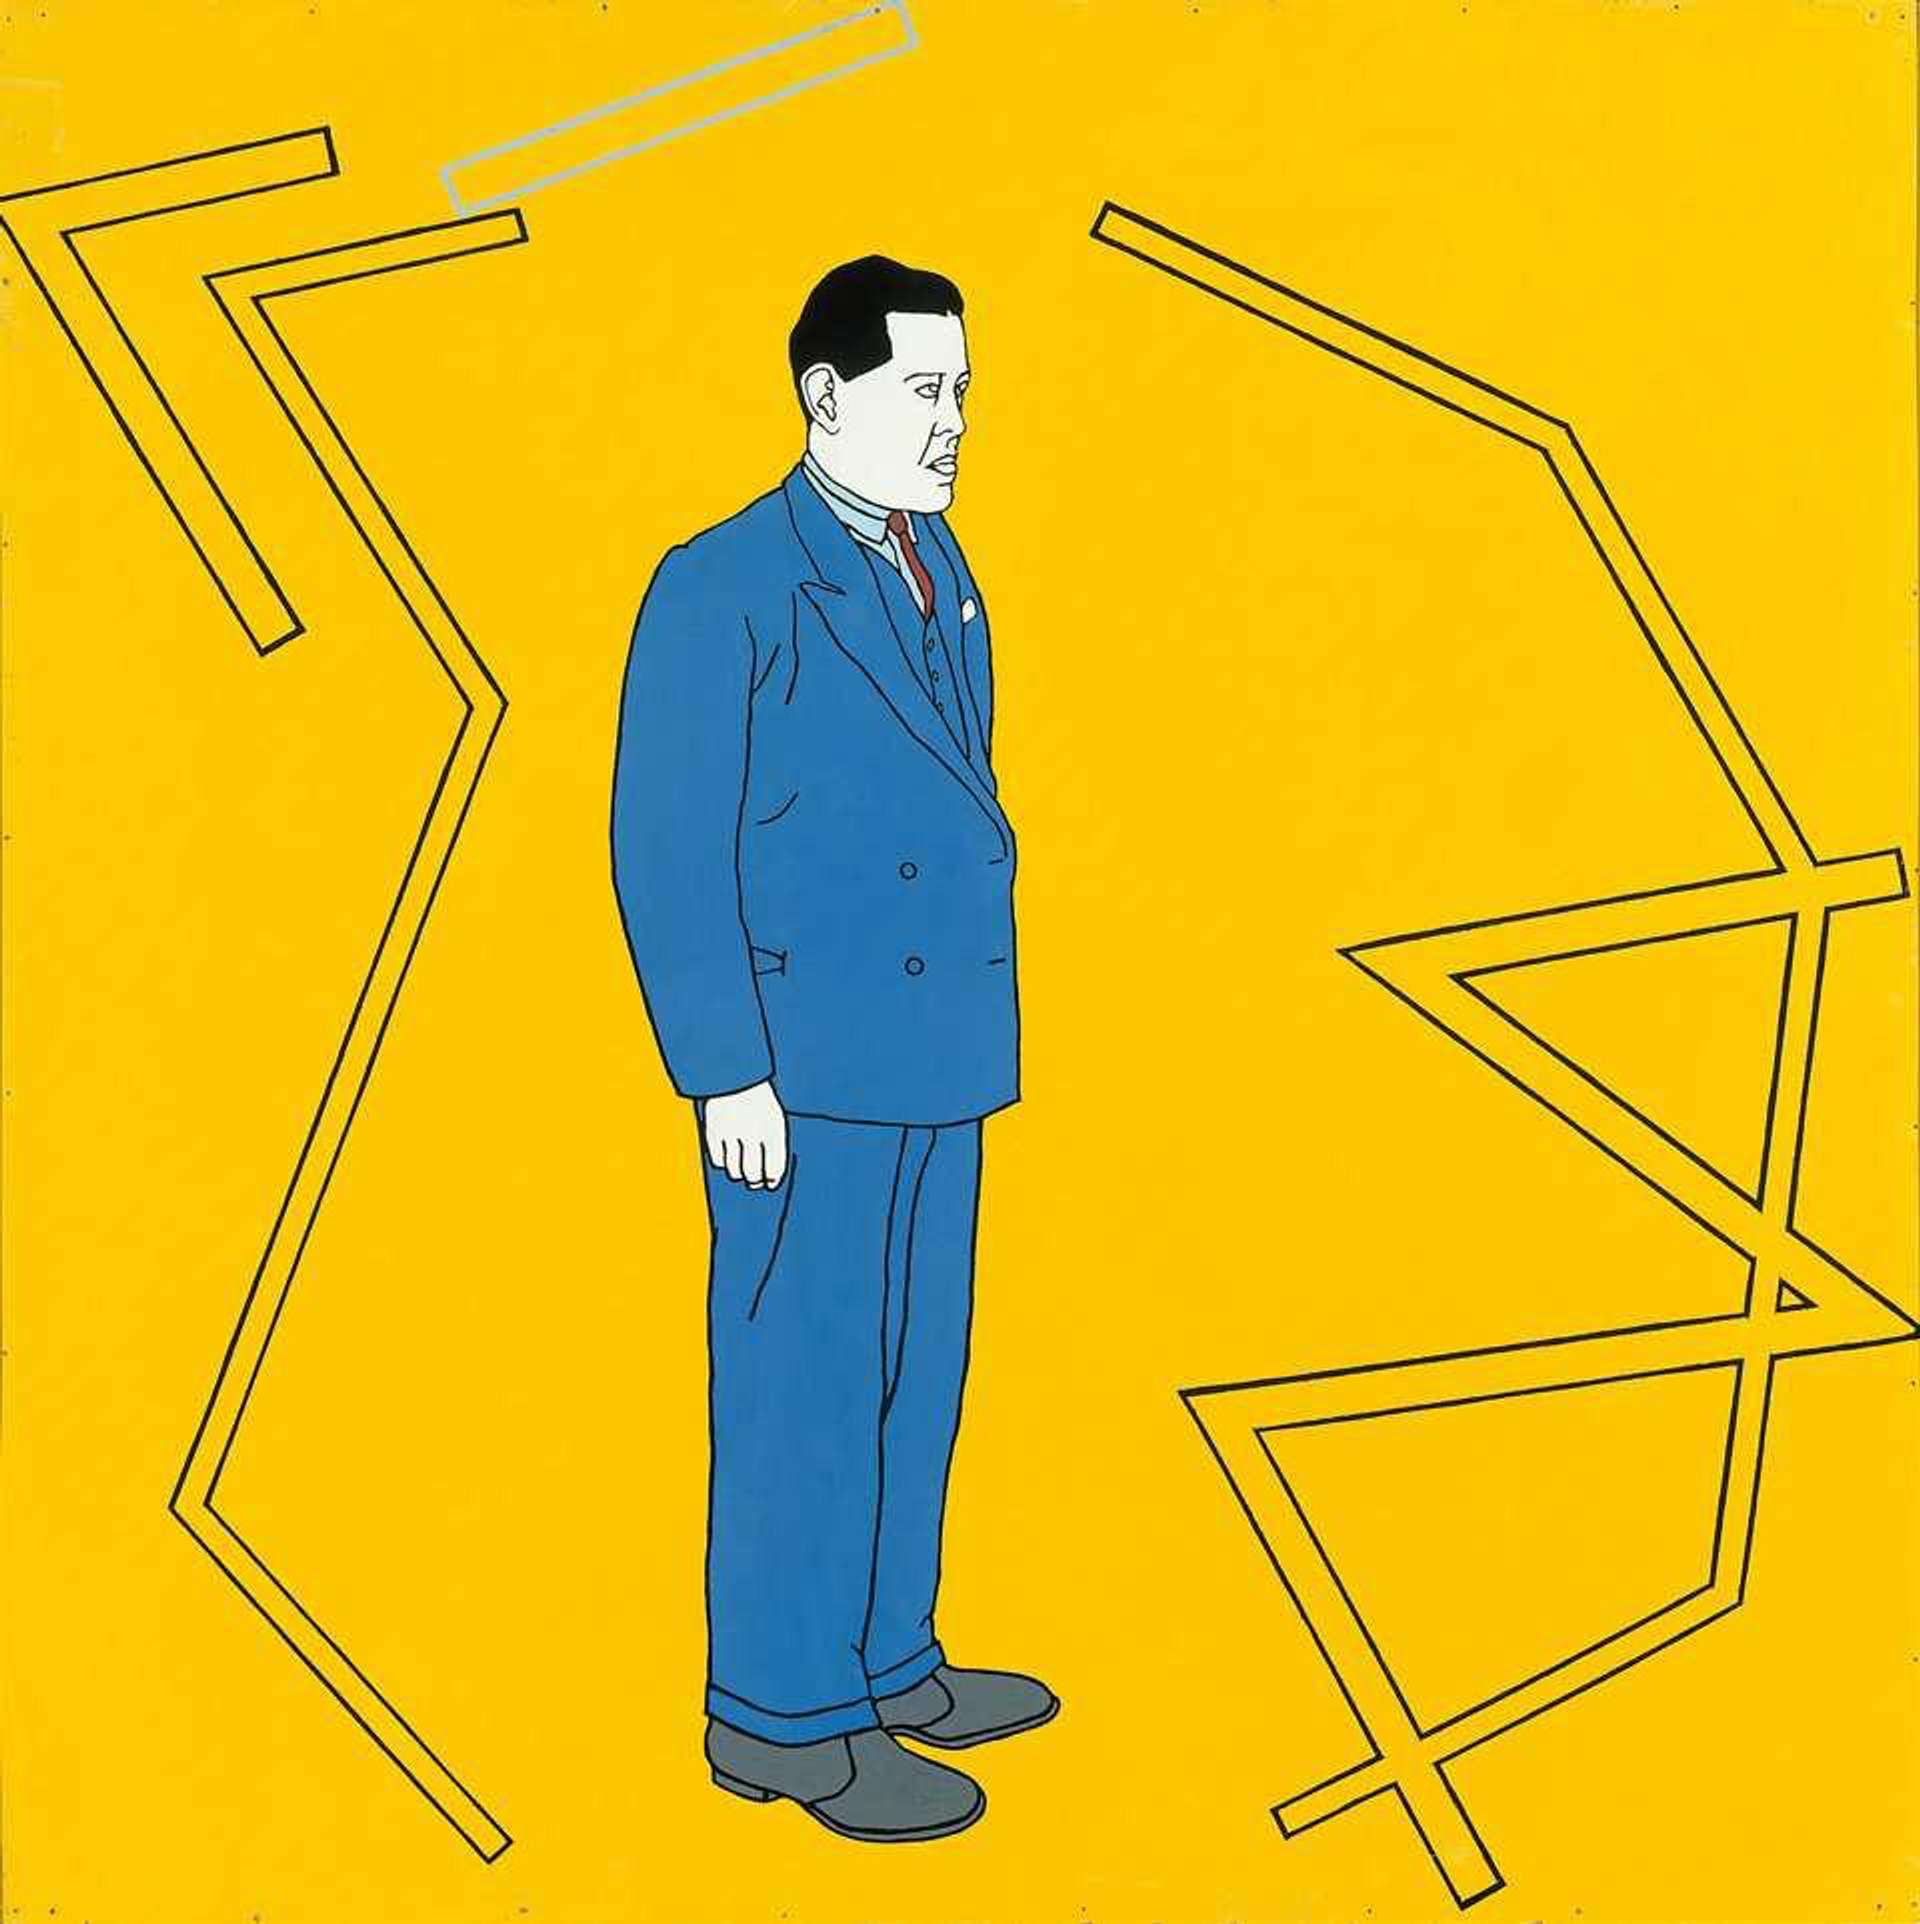 A pop art inspired painted portrait of Juan Gris by the artist Patrick Caulfield, which depicts the artist Juan Gris in blue against a yellow background, surrounded by geometric shapes.